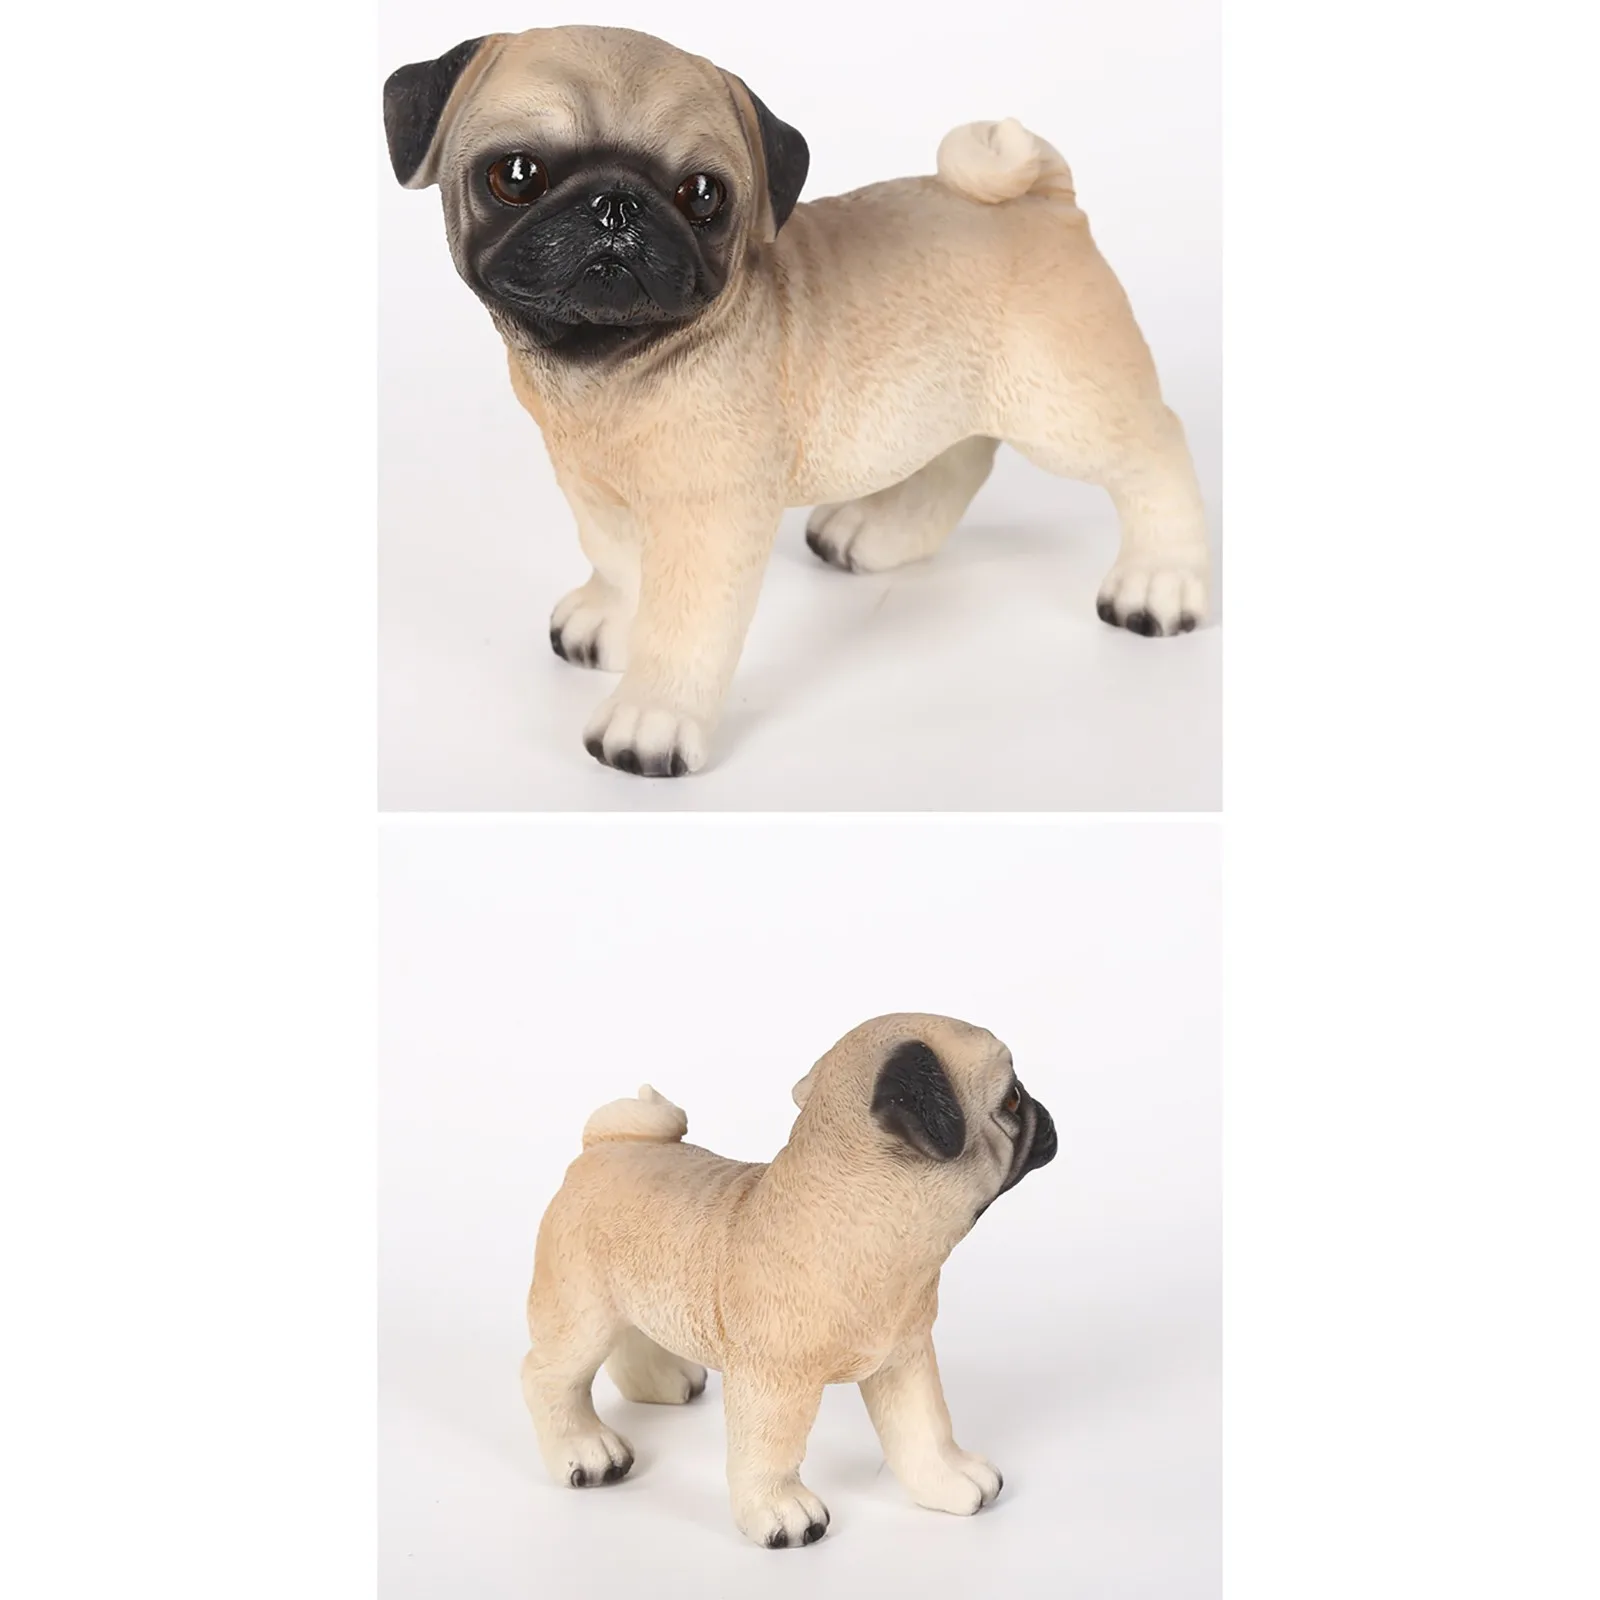 Pug Dog Statue Decoration Ornaments,Birthday Gifts Resin Craft Jewelry Home Decorations Statues Ornaments 